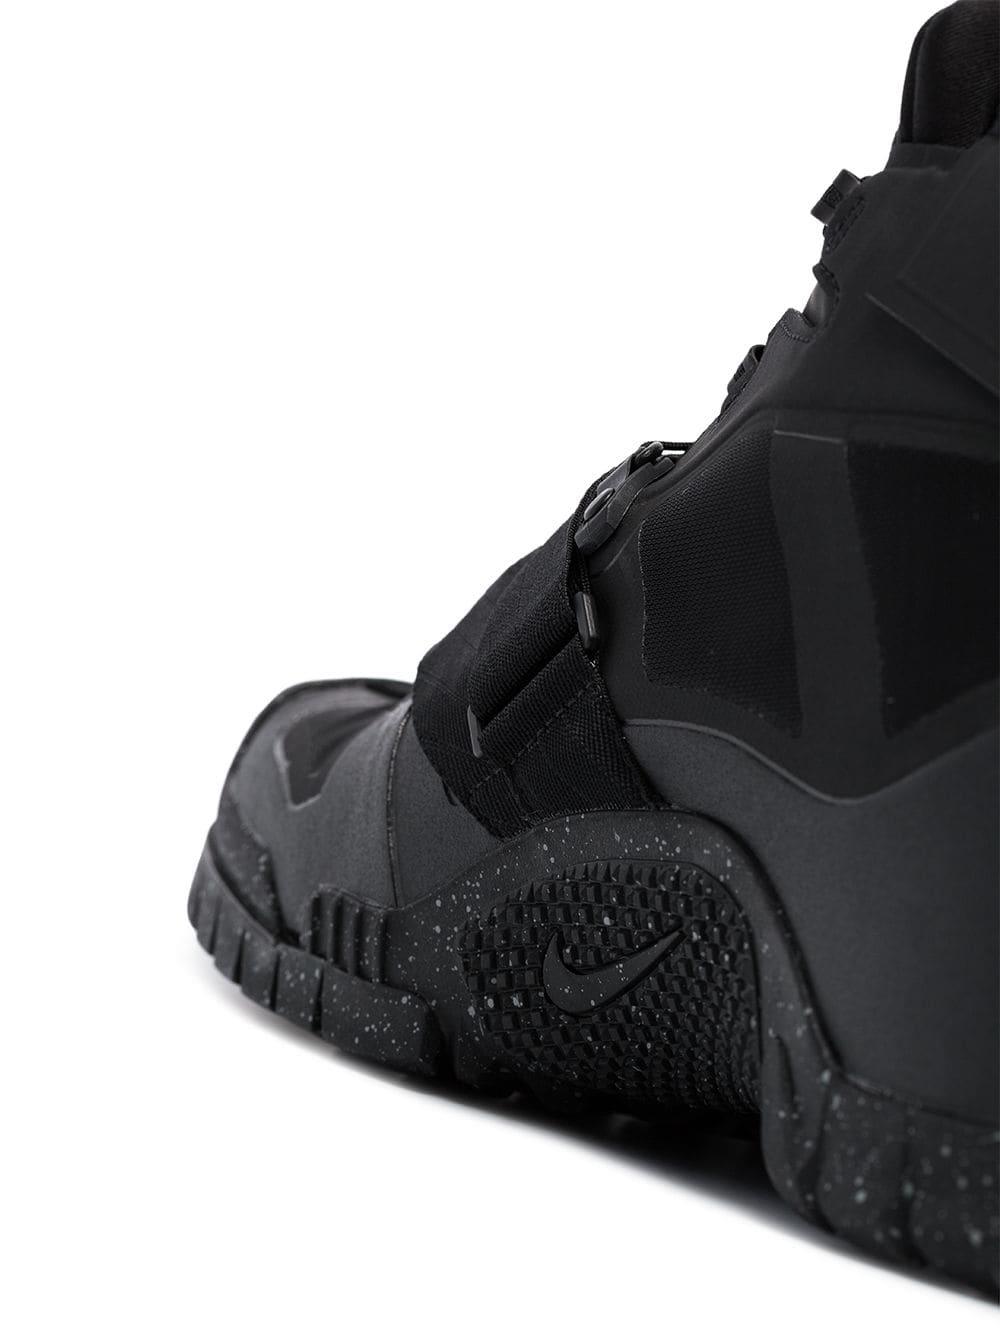 Nike X Undercover: Sfb Mountain in Black for Men - Lyst